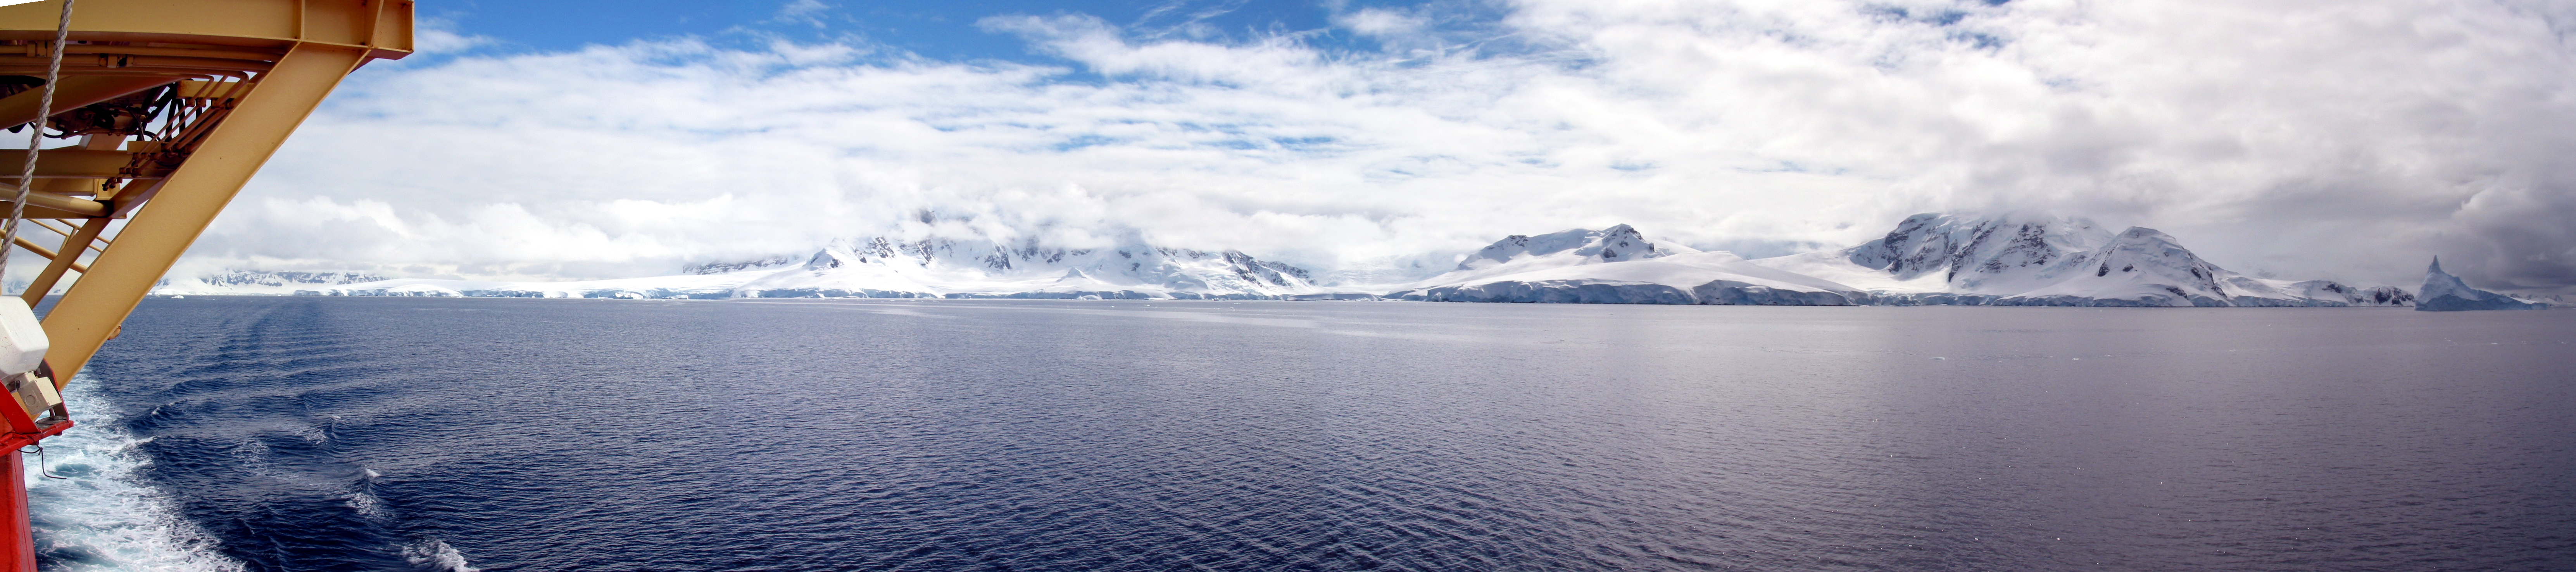 A view of water and snow-covered land from a ship.